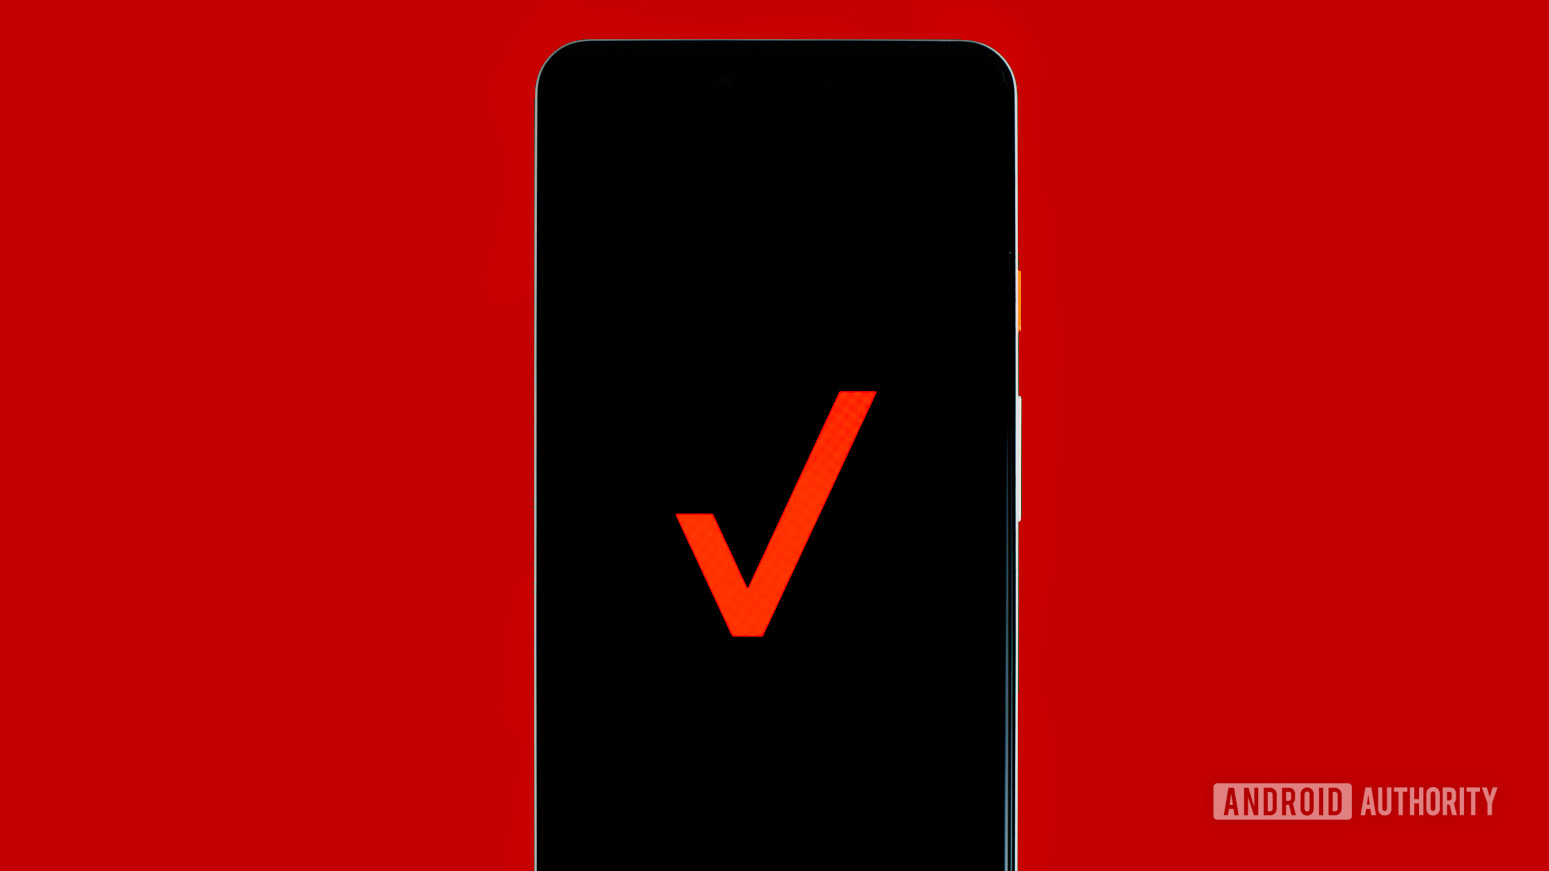 A stock photo of the Verizon logo on a dark phone screen against a solid red background.